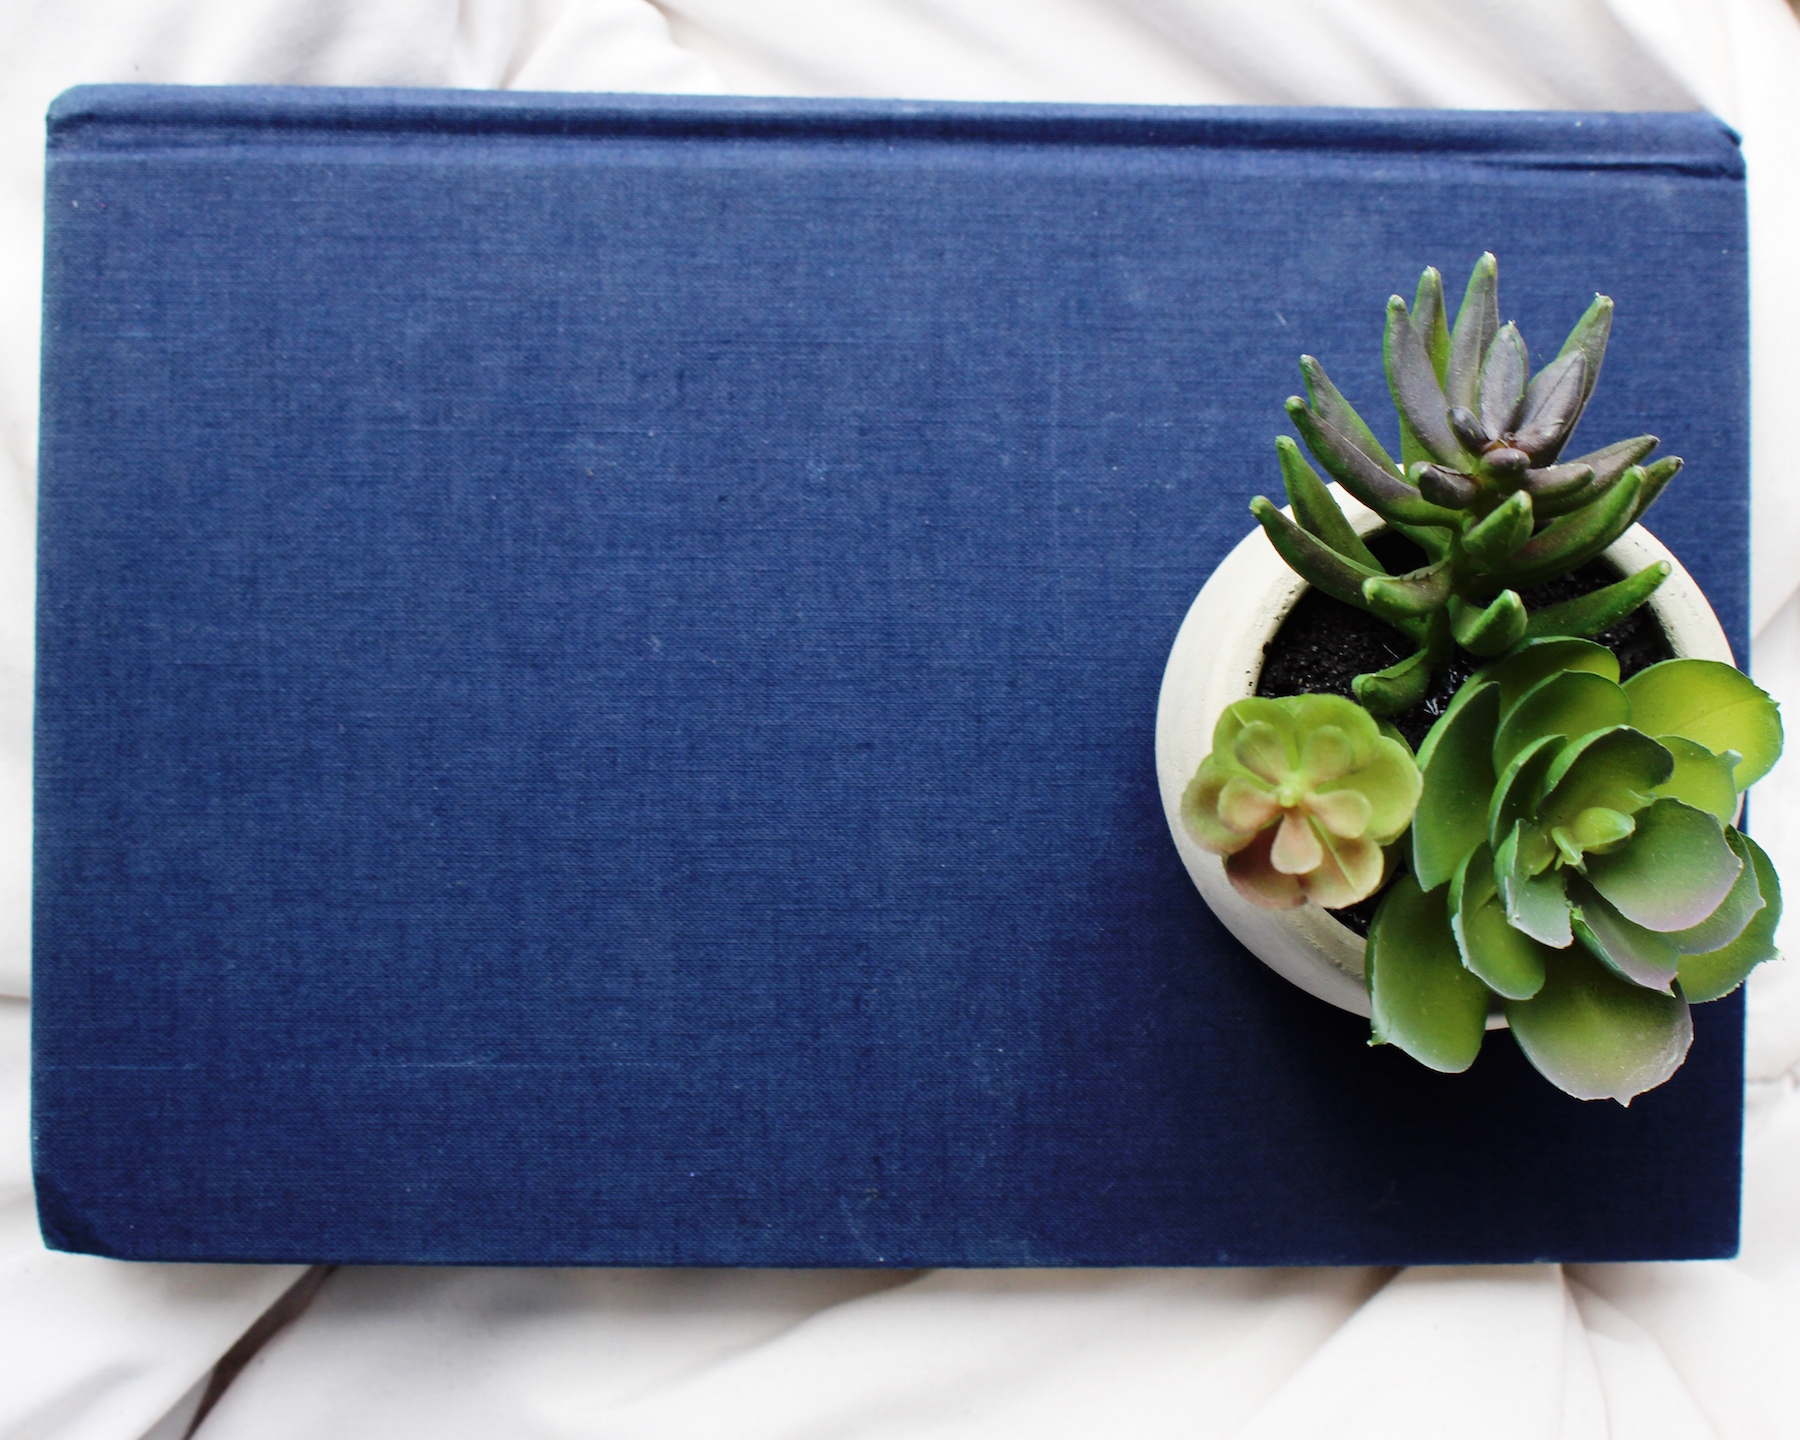 Journaling for Creativity and Stress Relief | Self-Care for Entrepreneurs